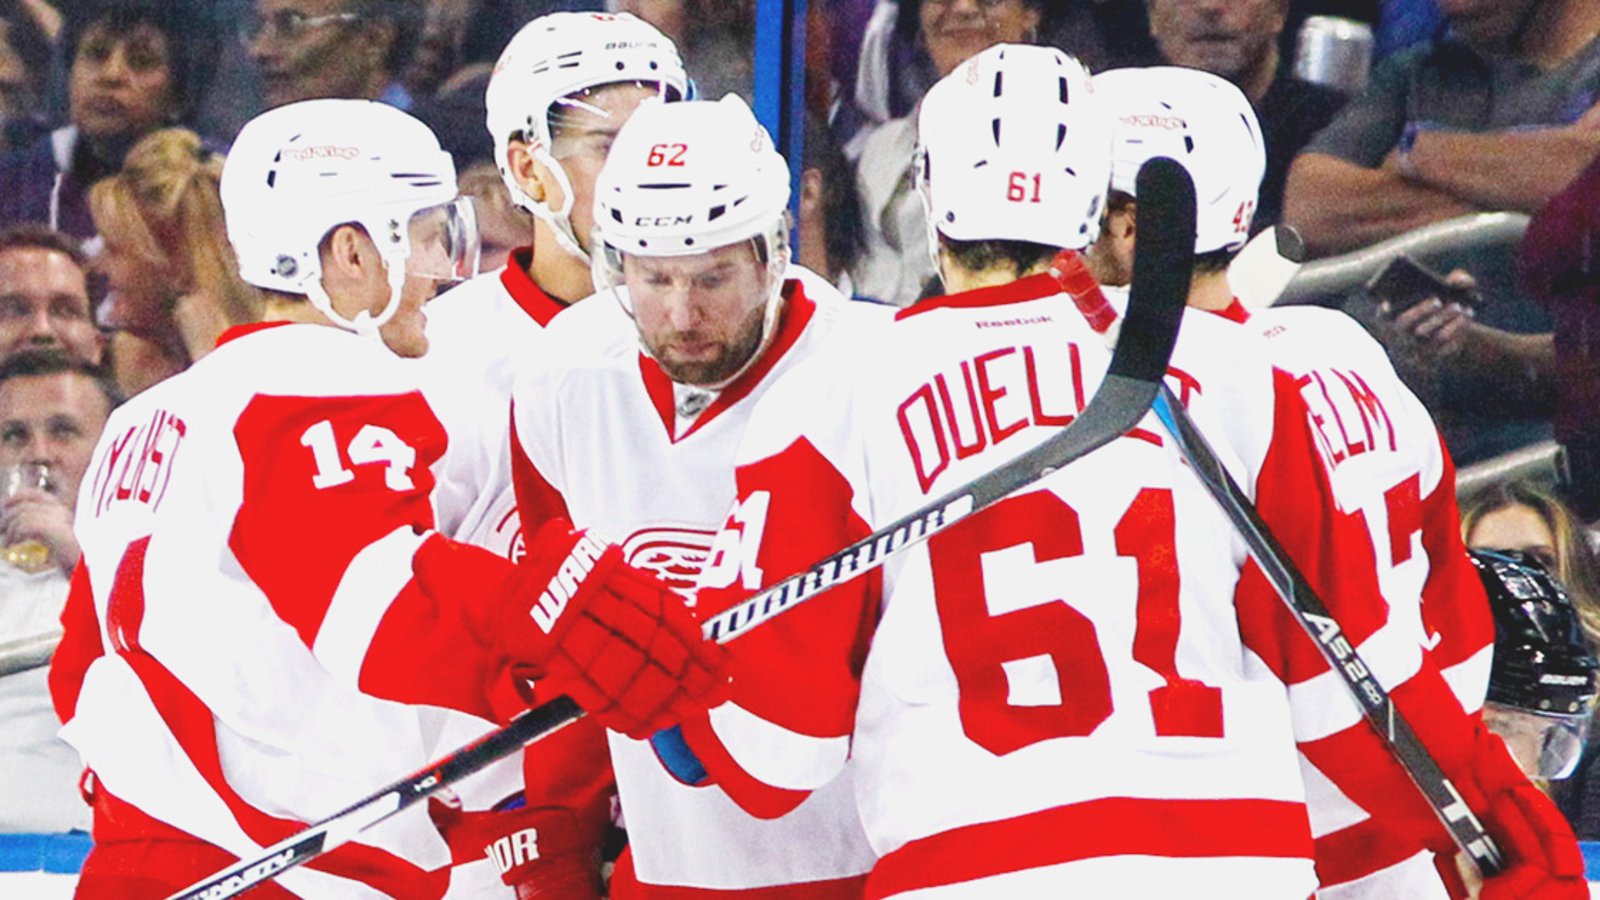 Jeff Blashill might be ready to give deserving player a real chance.